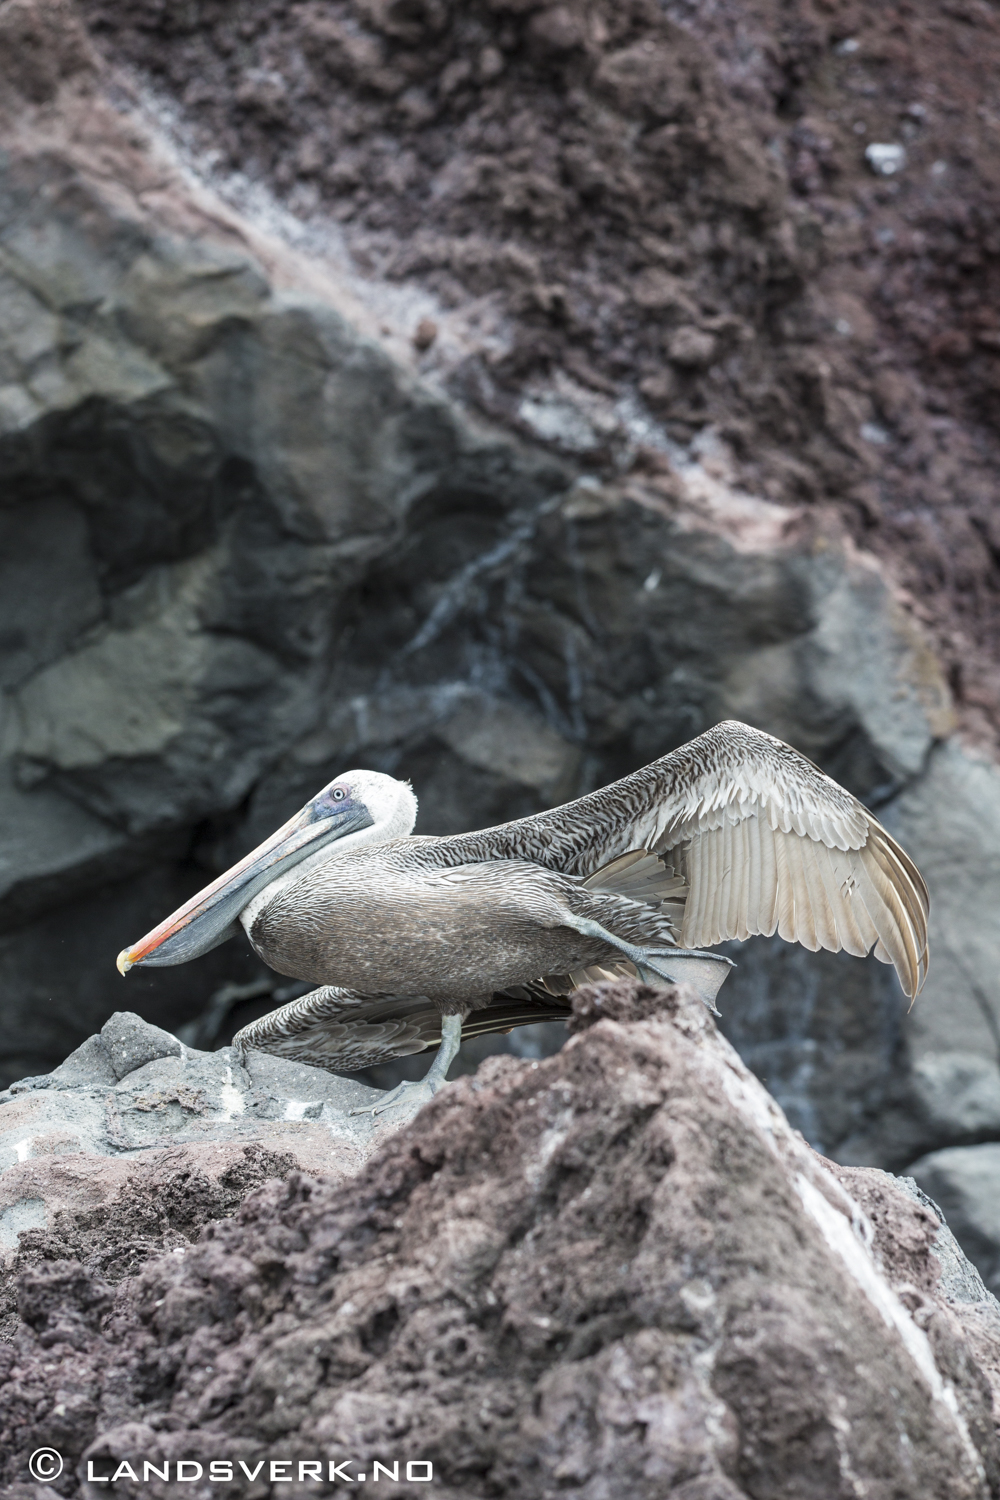 Wild Pelican doing some stretching, Bucaneer Cove, Isla Santiago, Galapagos. 

(Canon EOS 5D Mark III / Canon EF 70-200mm f/2.8 L IS II USM)